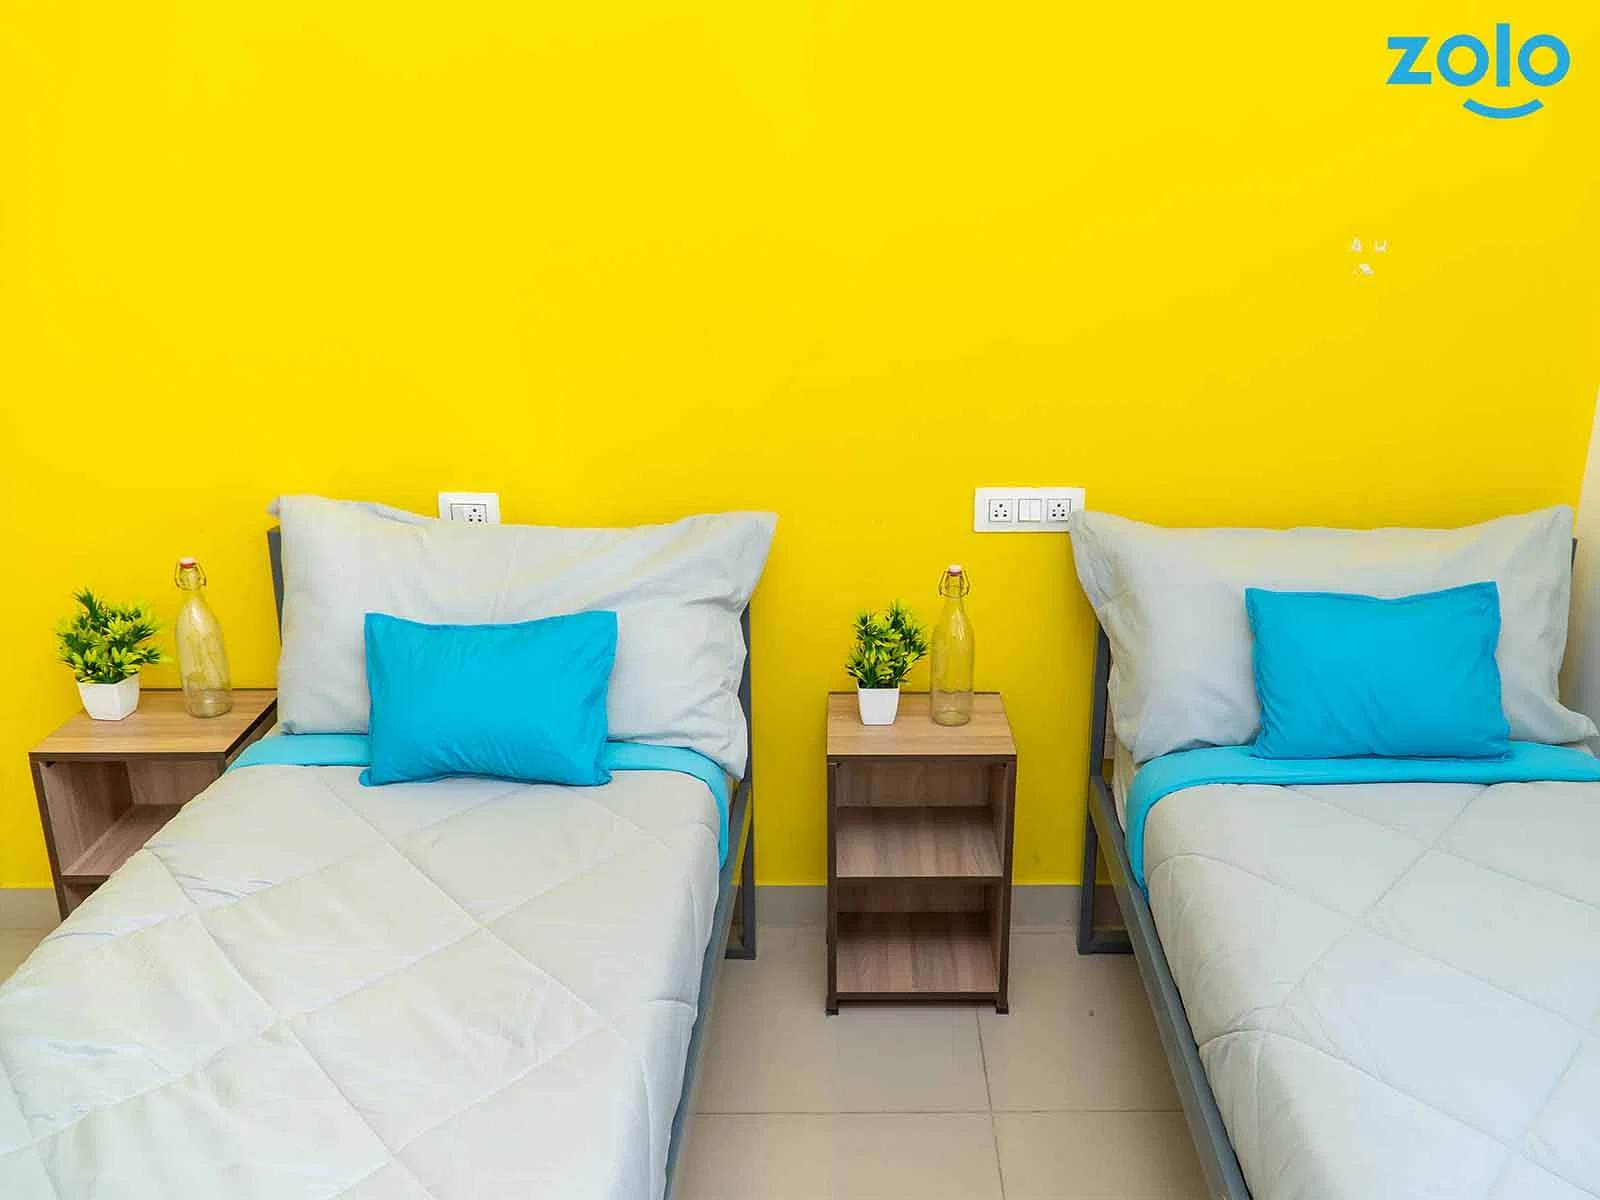 Affordable single rooms for students and working professionals in Sarjapura-Bangalore-Zolo Estonia B